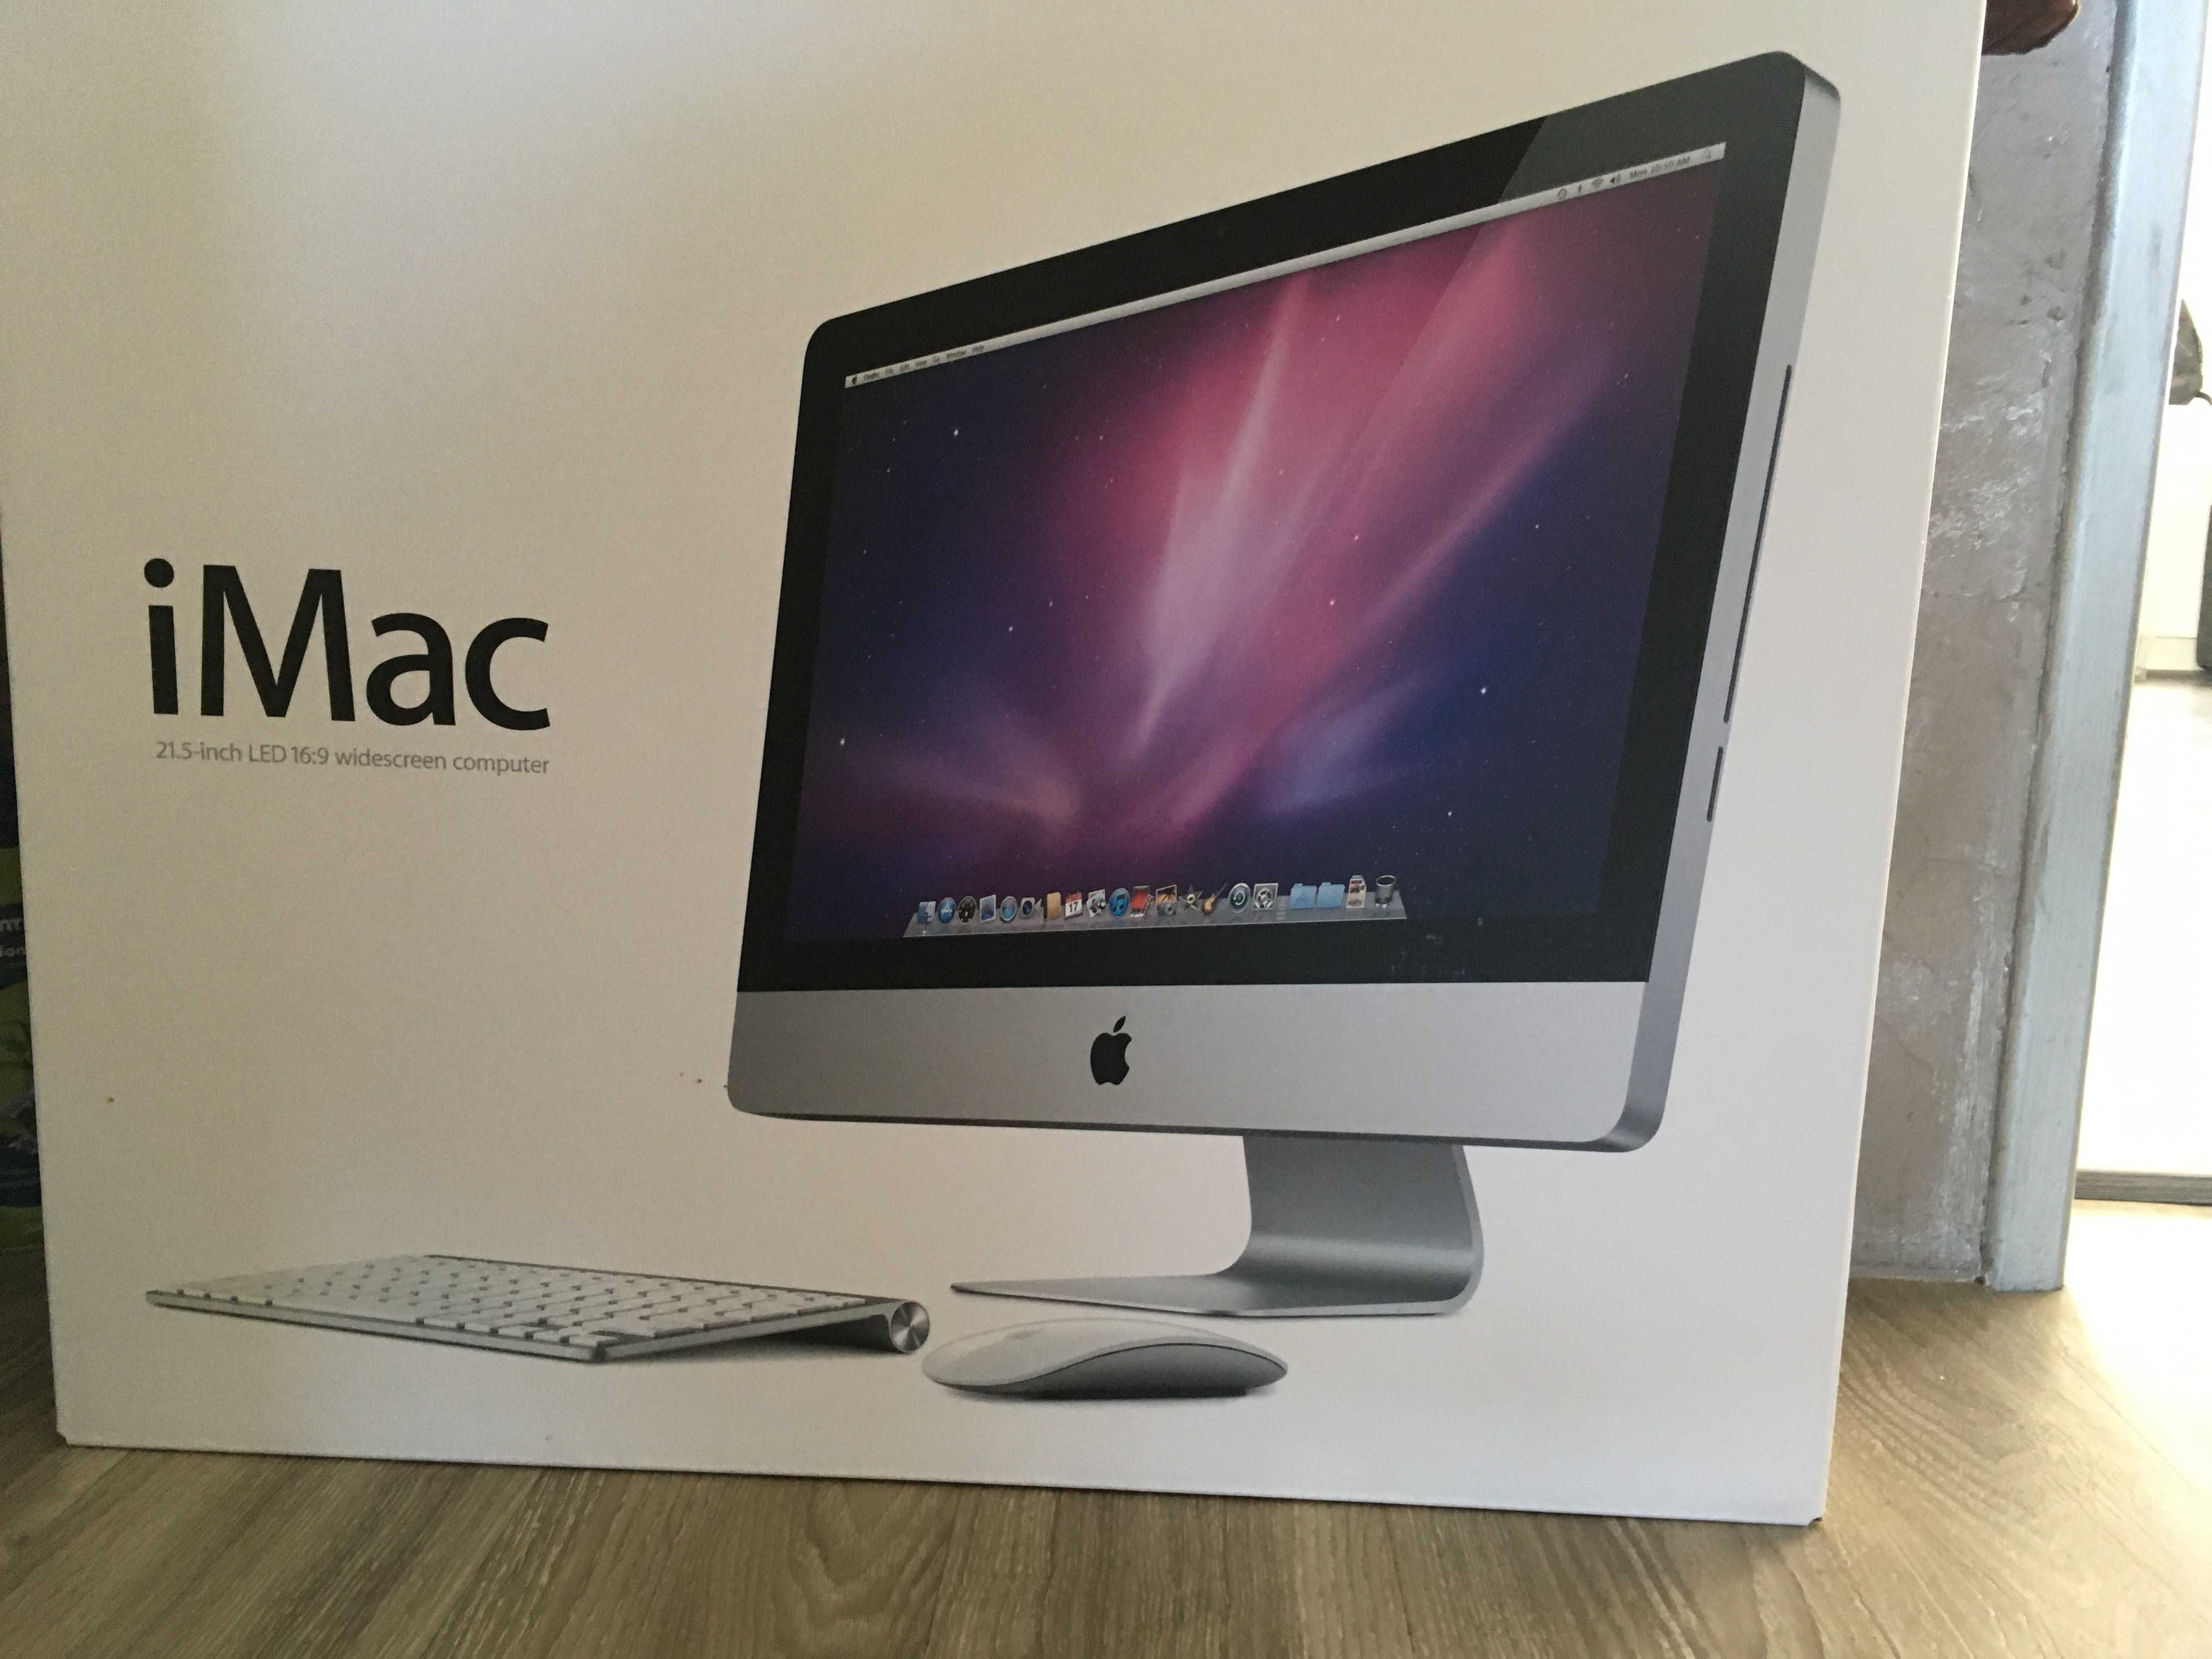 iMac 21.5-inch LED 16:9 widescreen computer